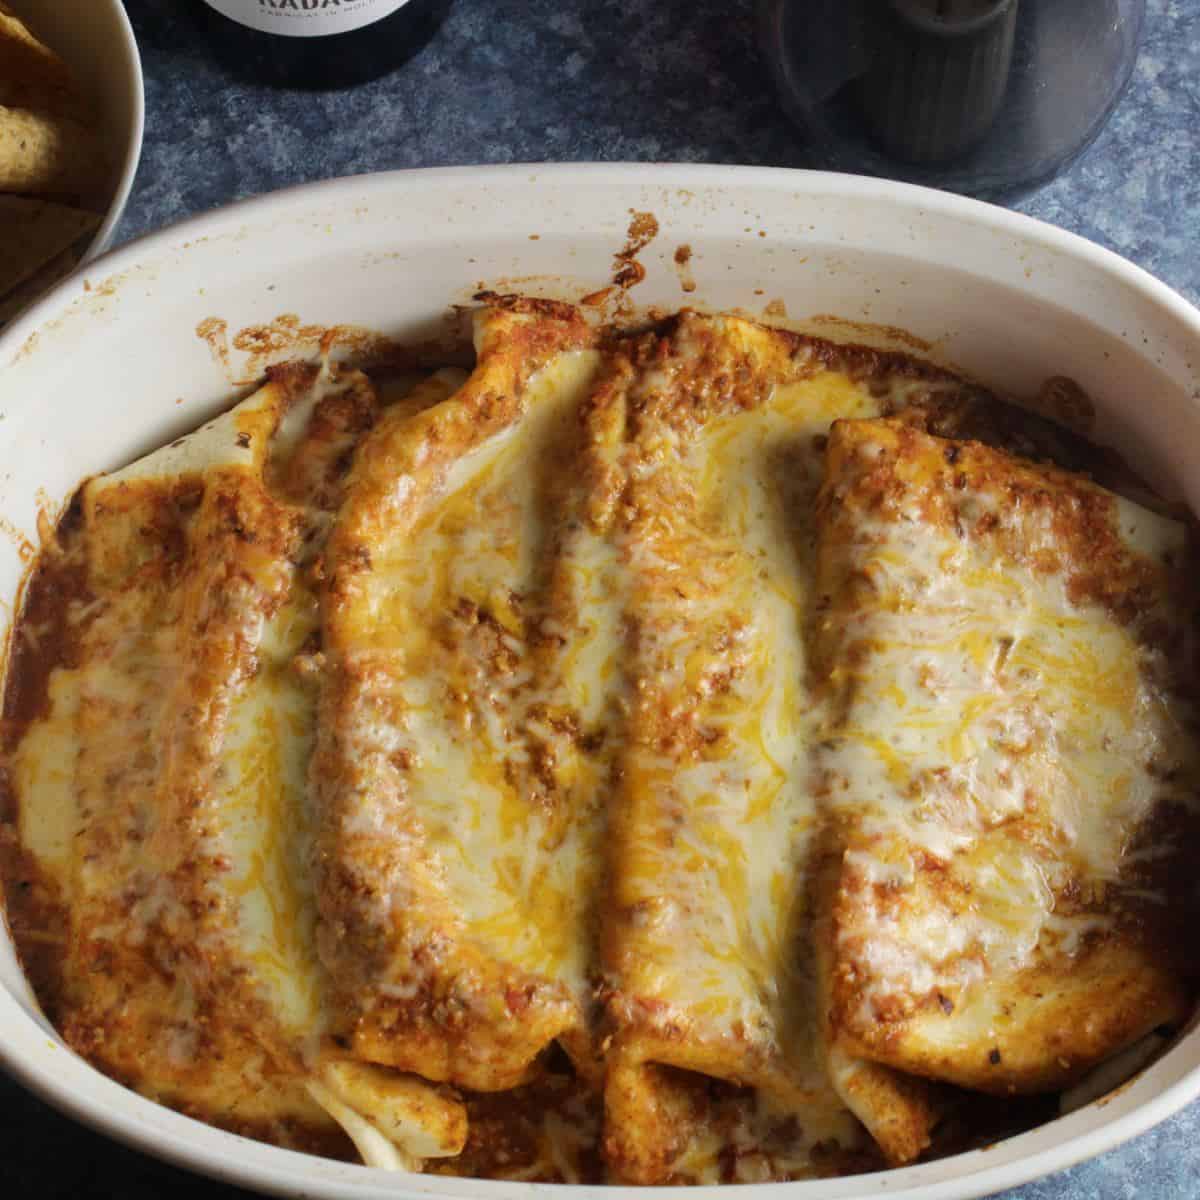 beef and bean enchiladas with chipotle sauce and melted cheese.